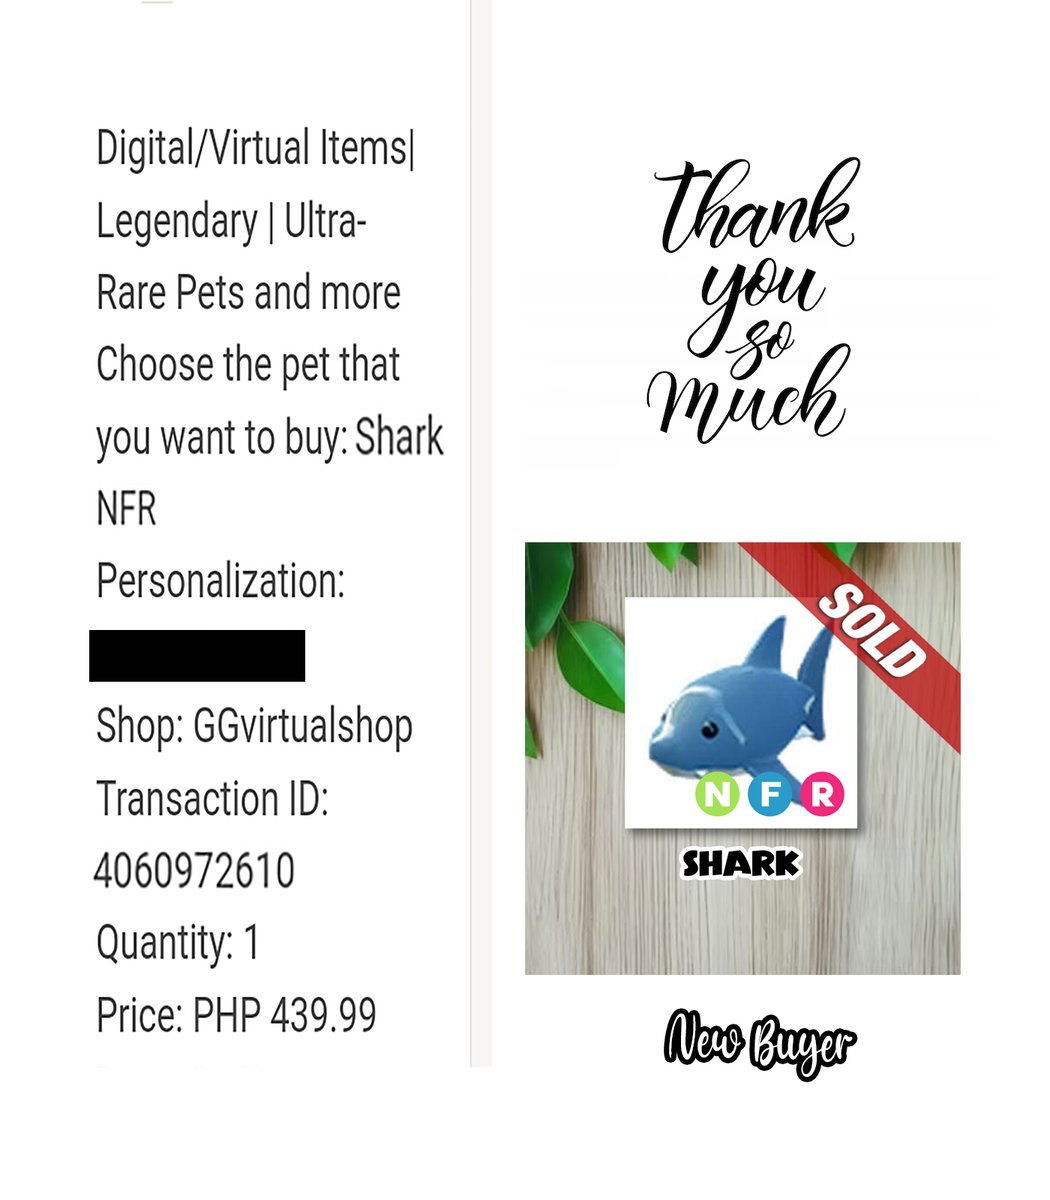 3⃣5⃣ Sold 3 pets to our NEW BUYER thank you so much for trusting & ordering to our shop😇

#Adoptme #AdoptMePets #adoptmetrading #Adoptmeoffer #adoptmegiveaway #adoptmegw #adoptmeshop #adoptmeseller #robloxadoptme #trustedshop #trustedseller #roblox #Adoptmetrade #ggvirtualshop